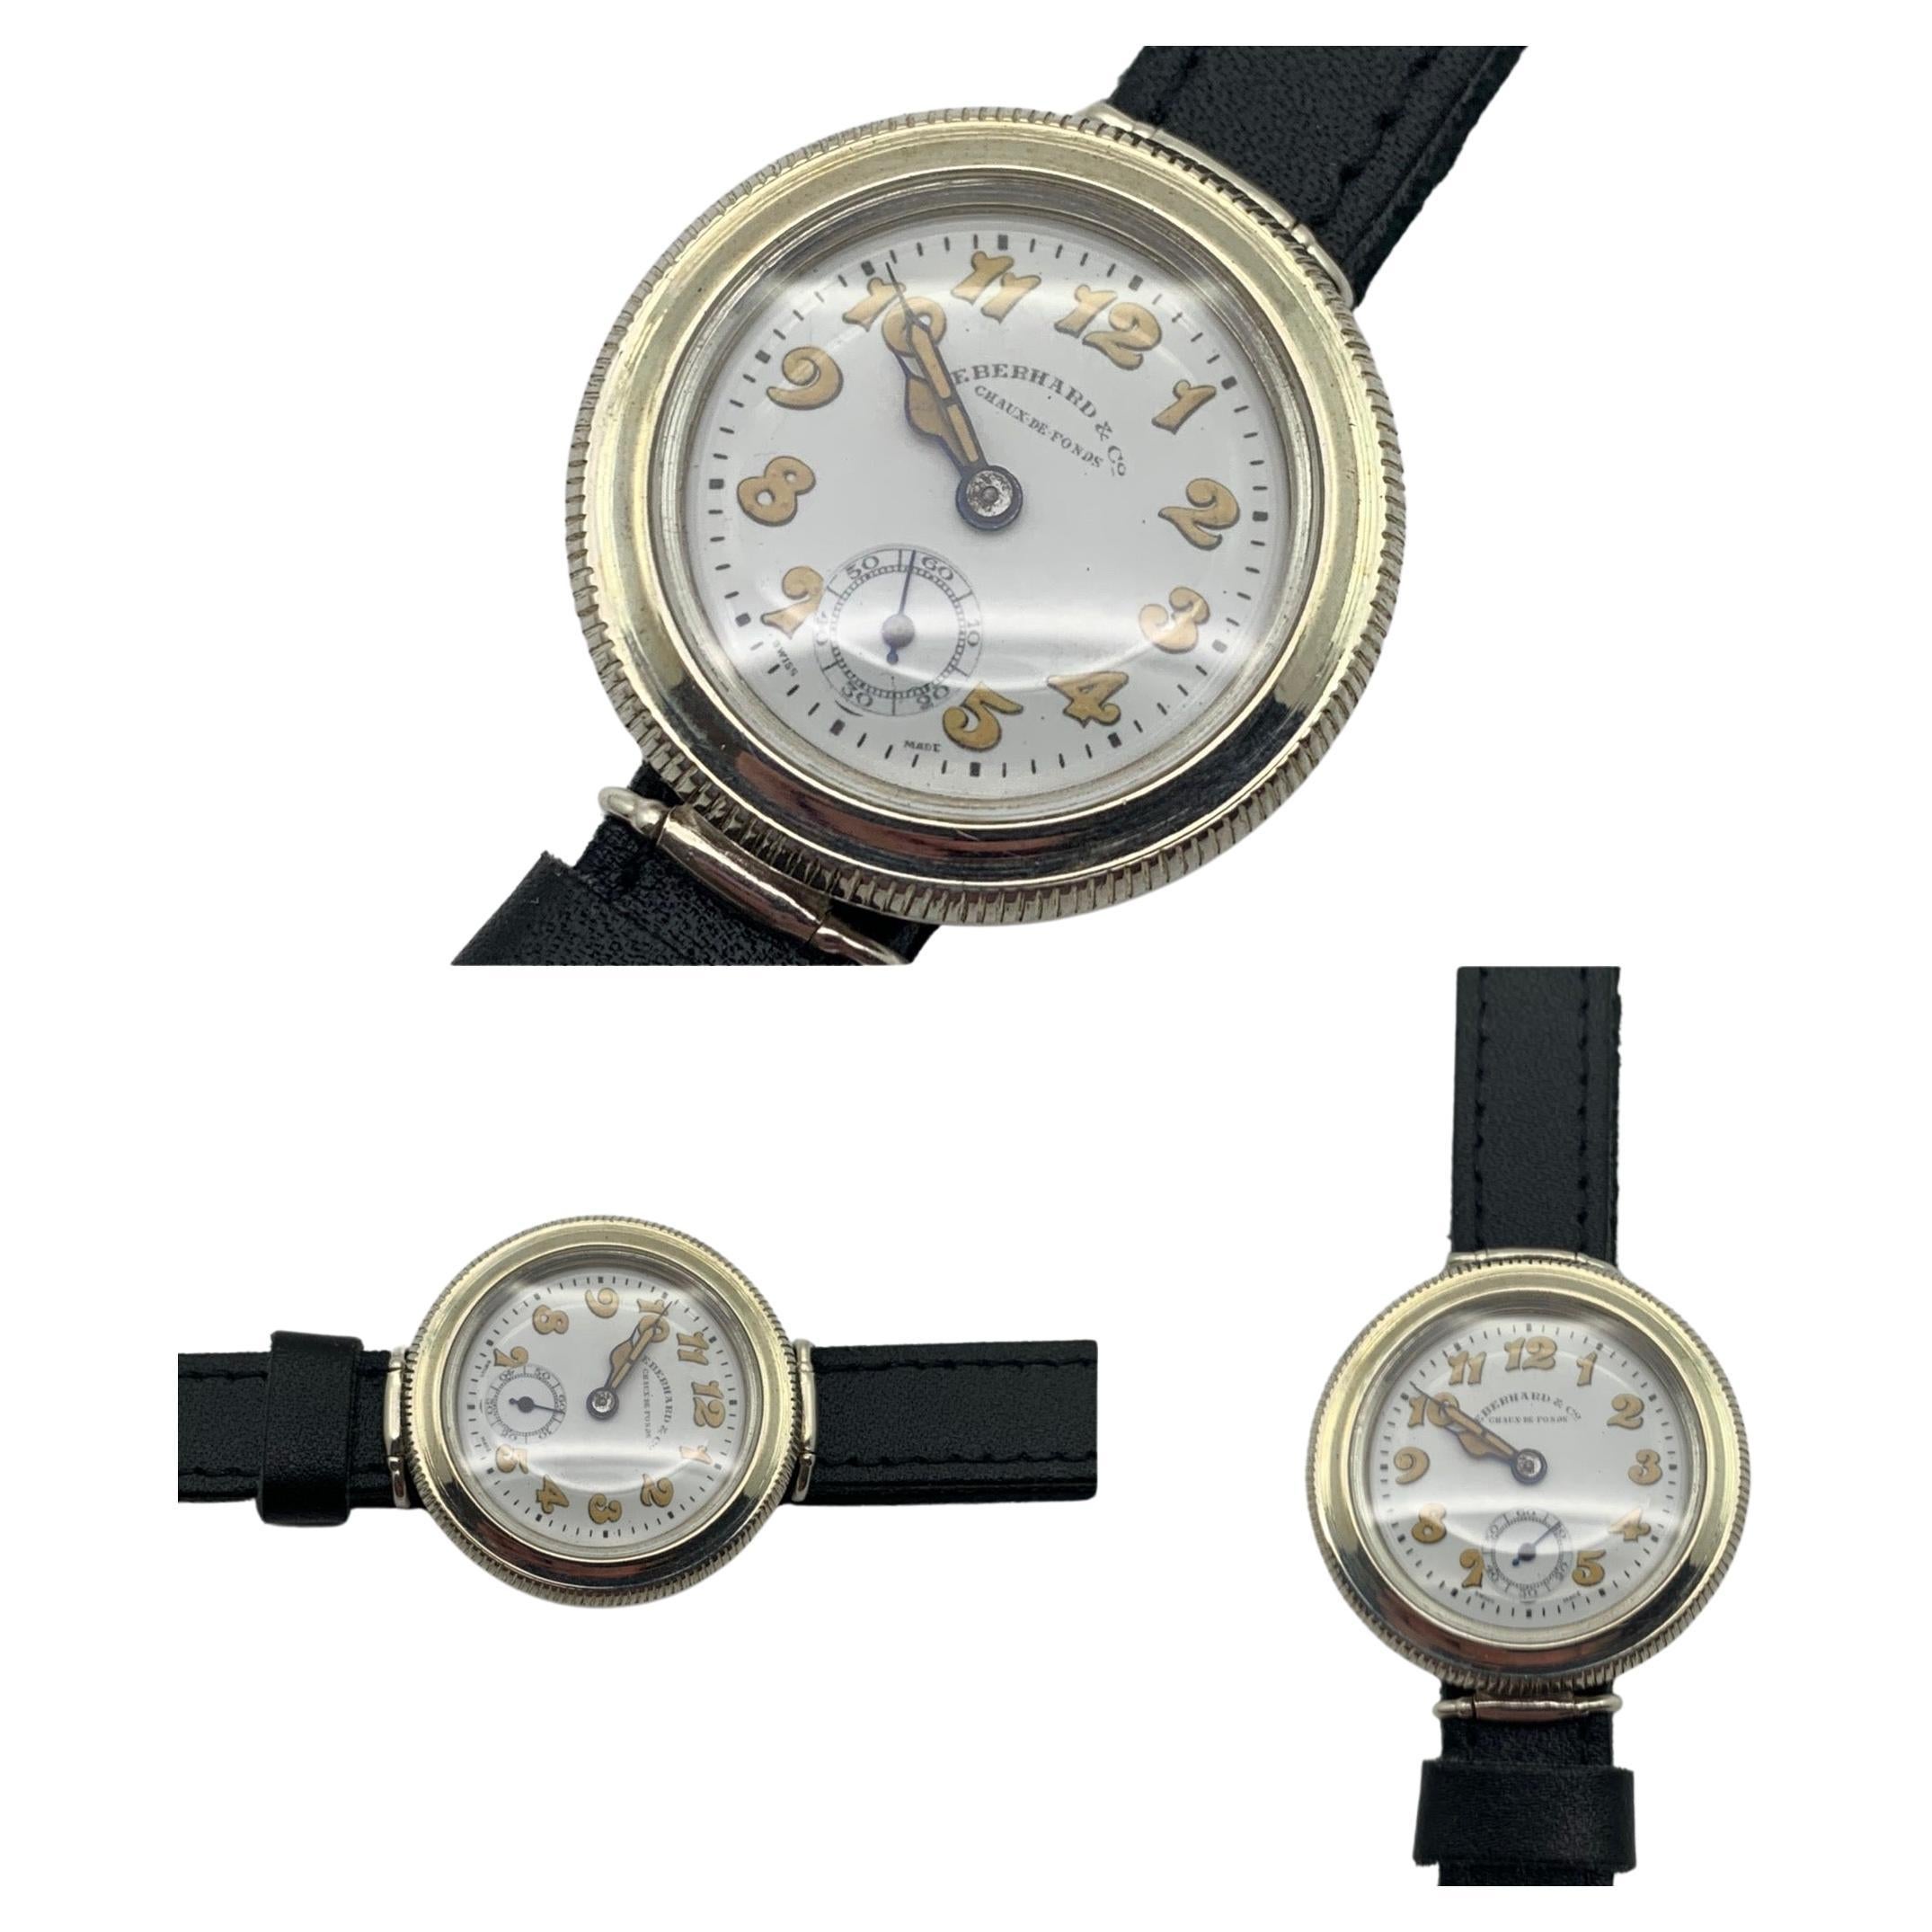 1920's Eberhard Hermetic 15J, Sterling Silver, Trench Watch Totally Restored For Sale